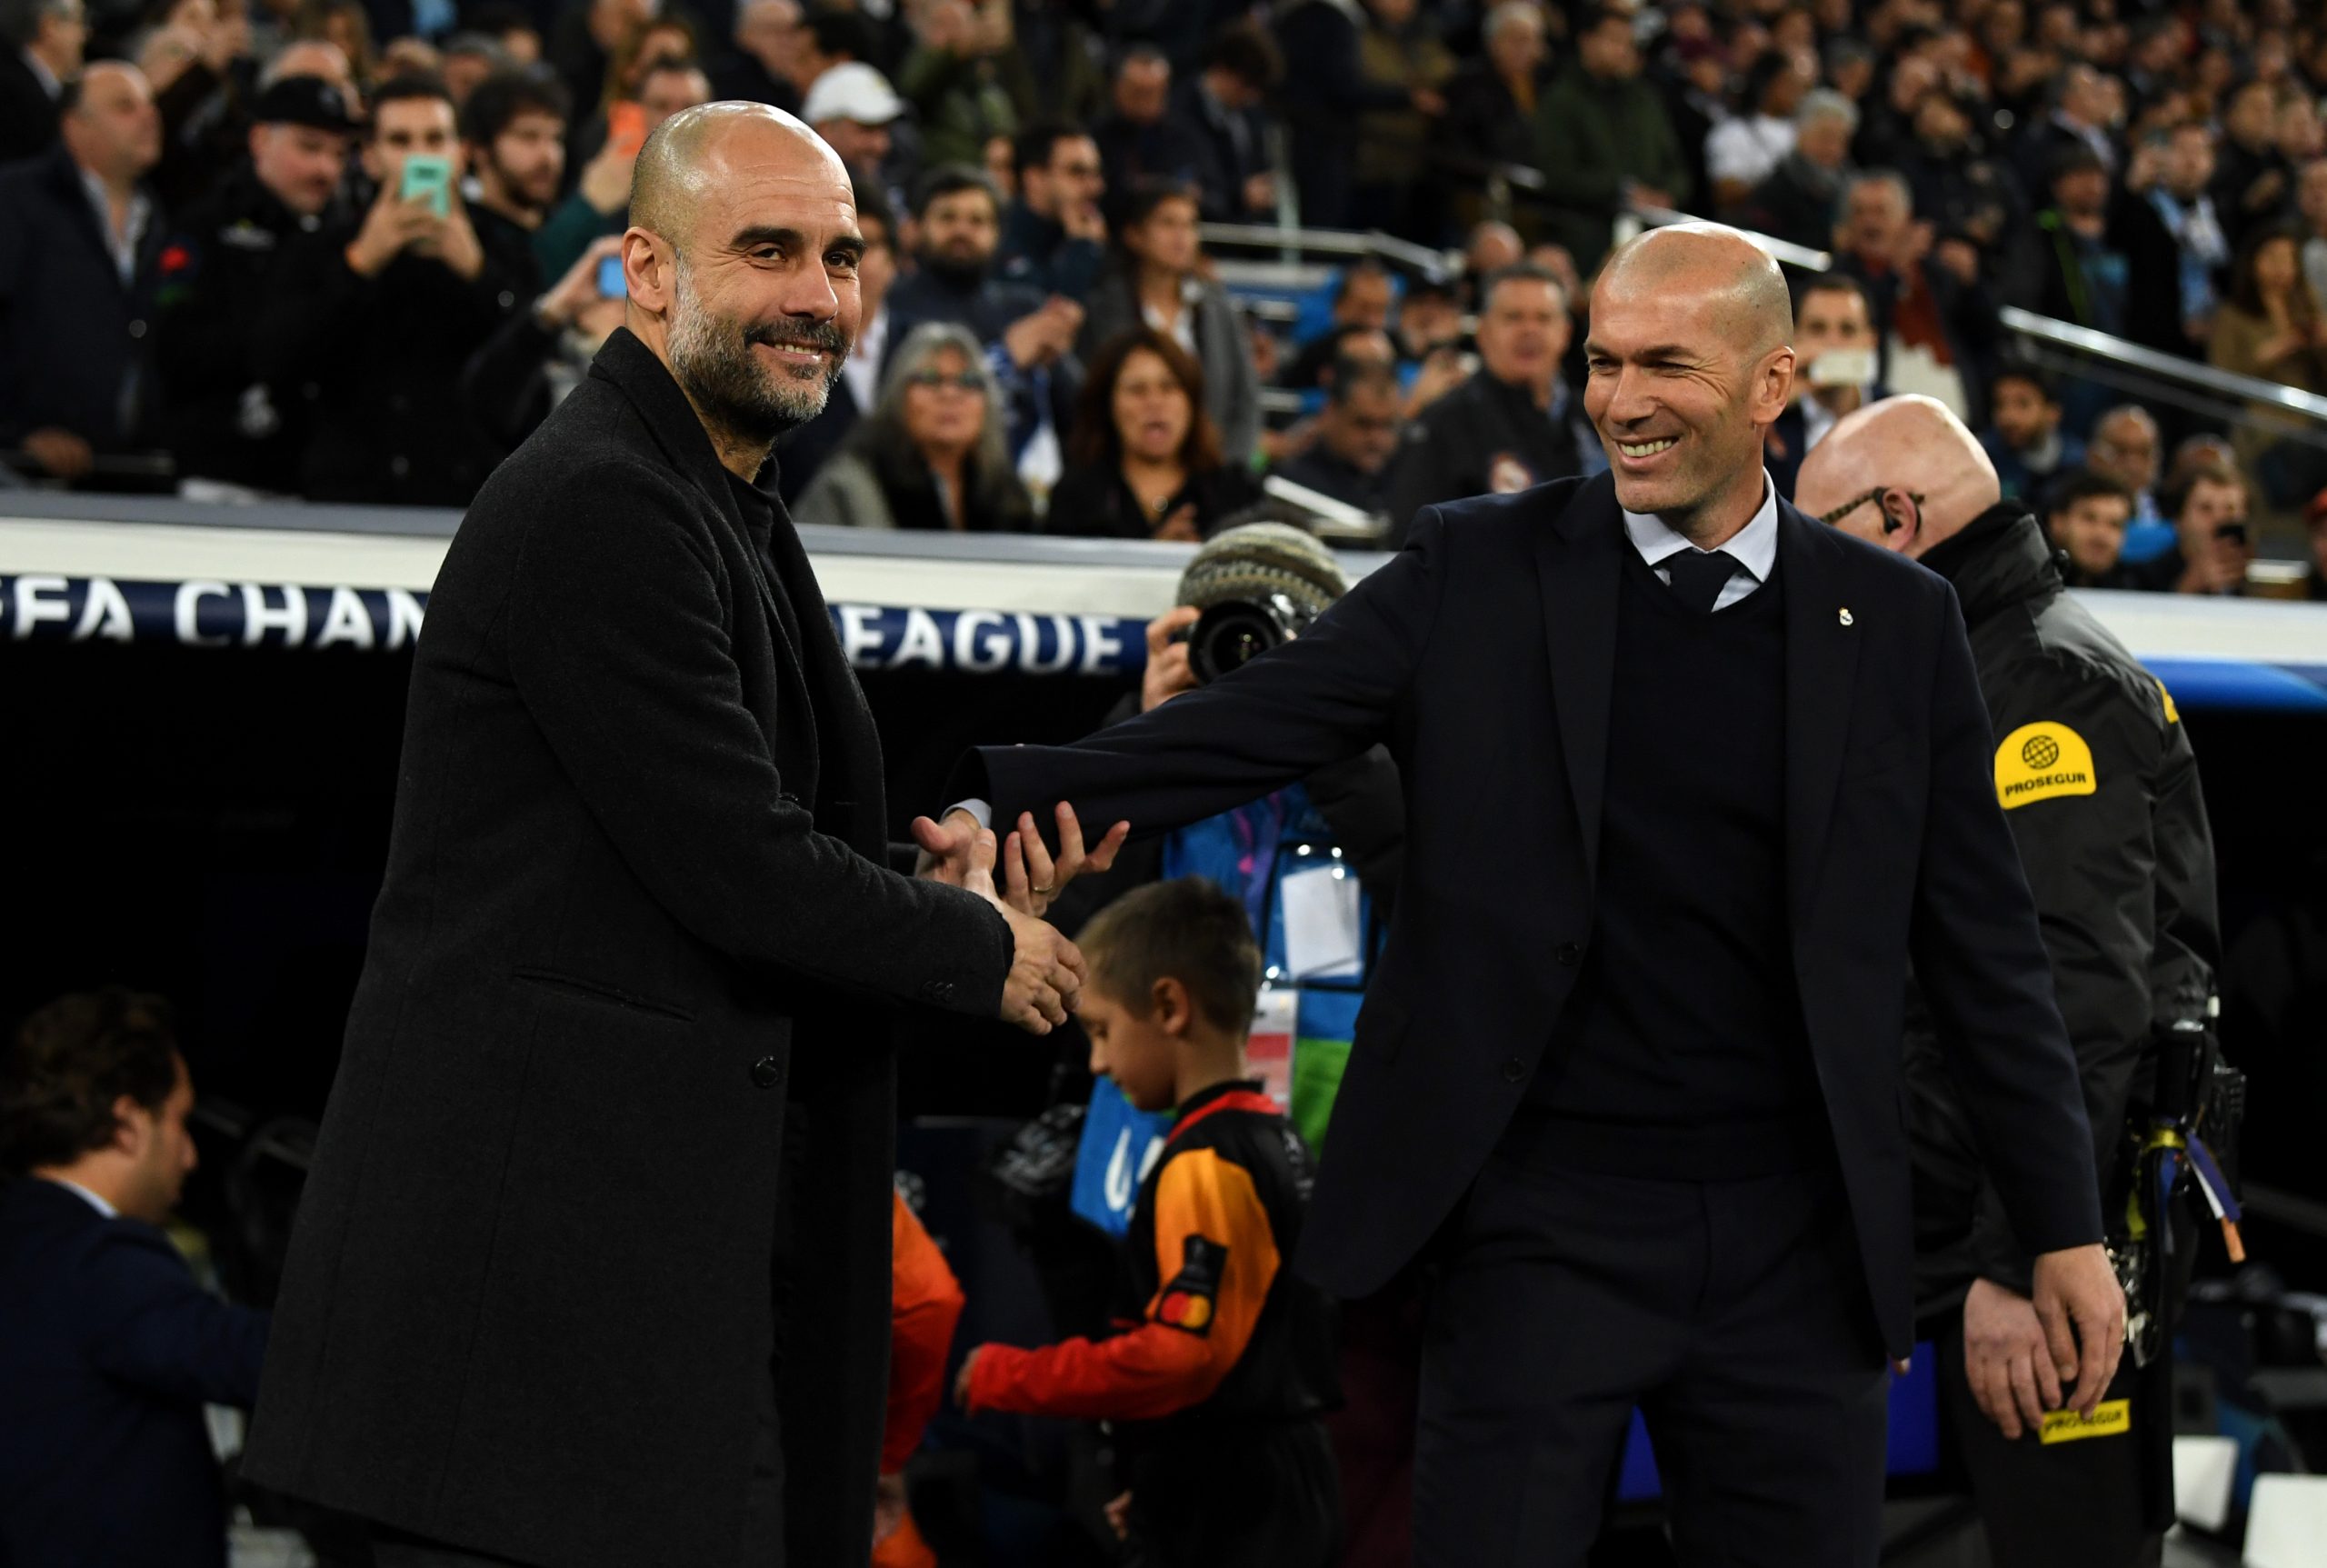 MADRID, SPAIN - FEBRUARY 26: Pep Guardiola, Manager of Manchester City shakes hands with Zinedine Zidane, Manager of Real Madrid prior to the UEFA Champions League round of 16 first leg match between Real Madrid and Manchester City at Bernabeu on February 26, 2020 in Madrid, Spain. (Photo by David Ramos/Getty Images)